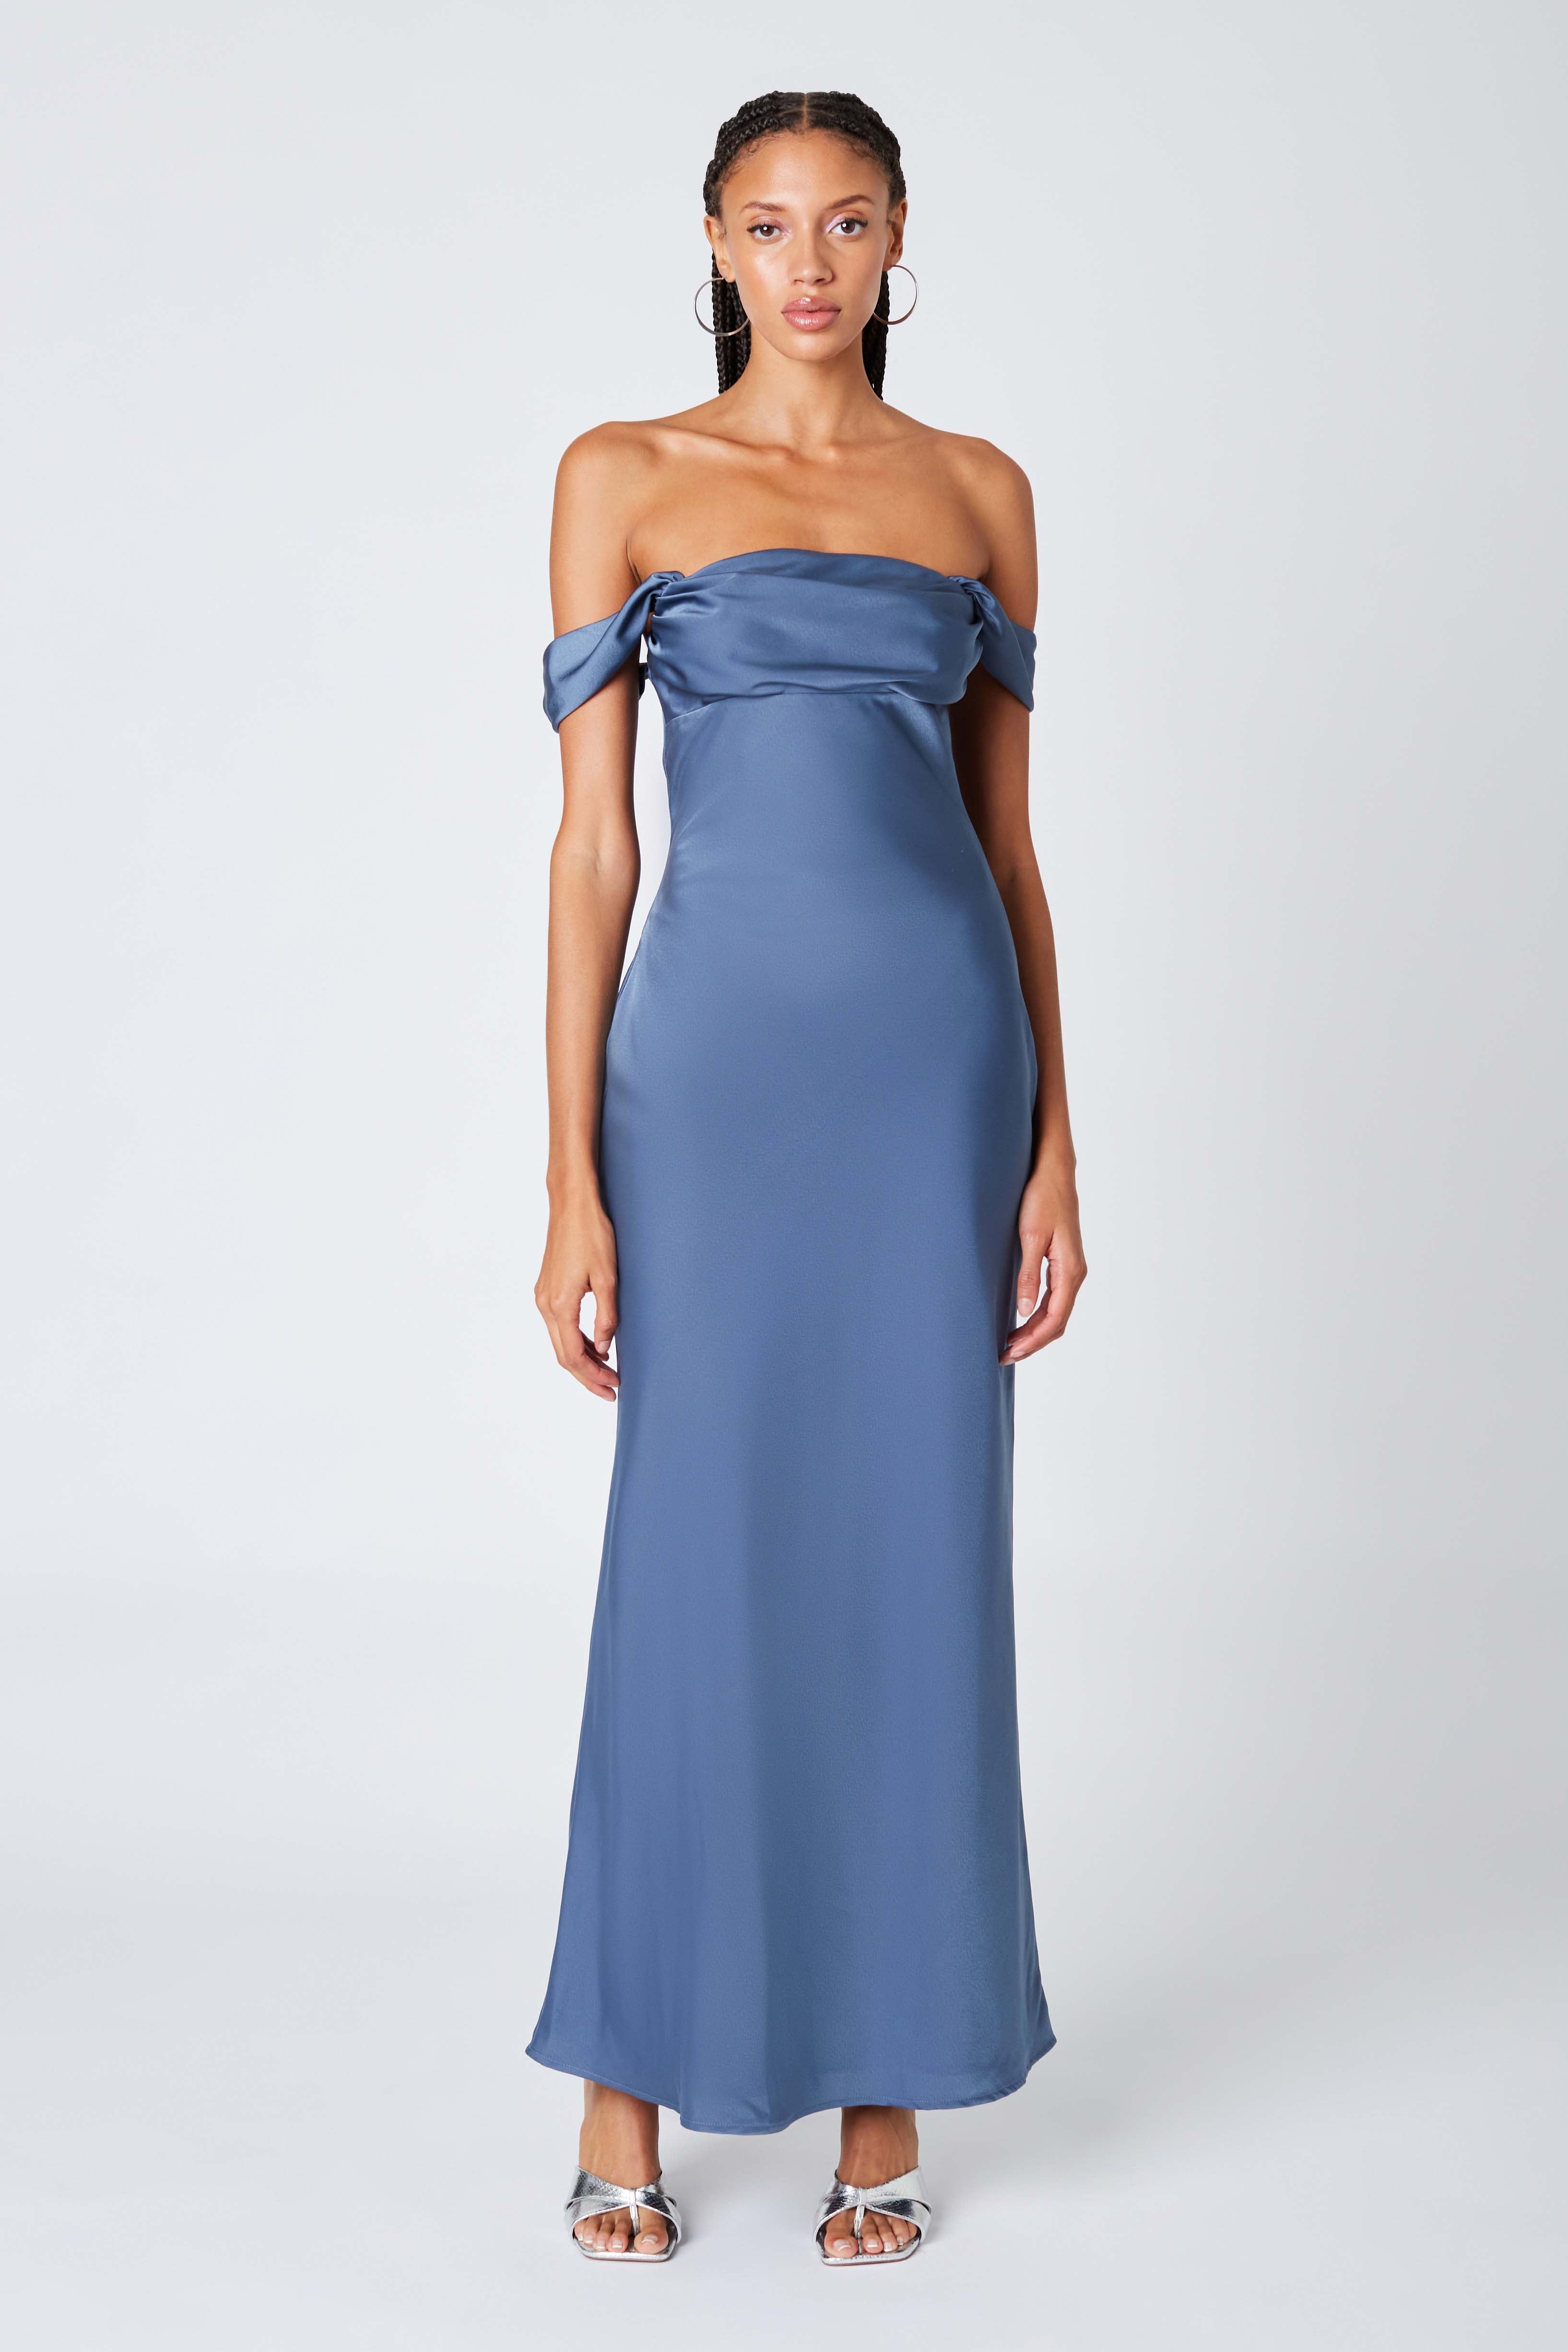 Satin Off the Shoulder Maxi Dress in Bluesteel Front View